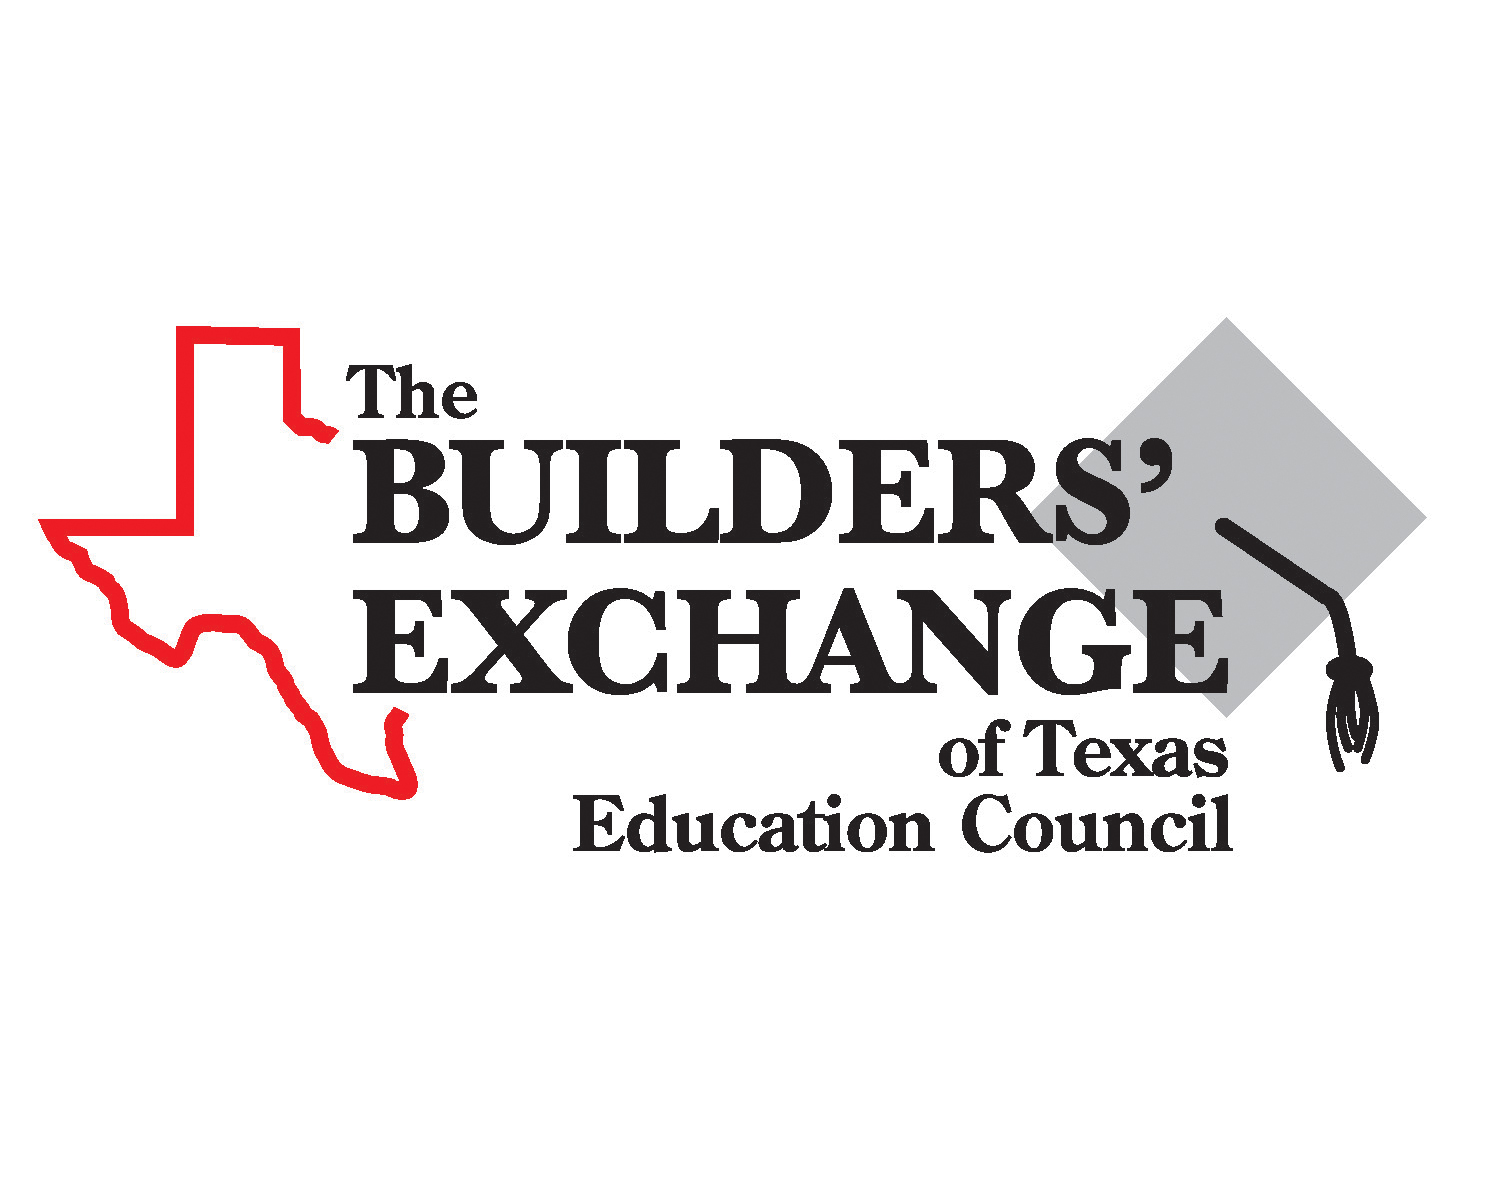 logo for the Builders' Exchange of Texas Education Council